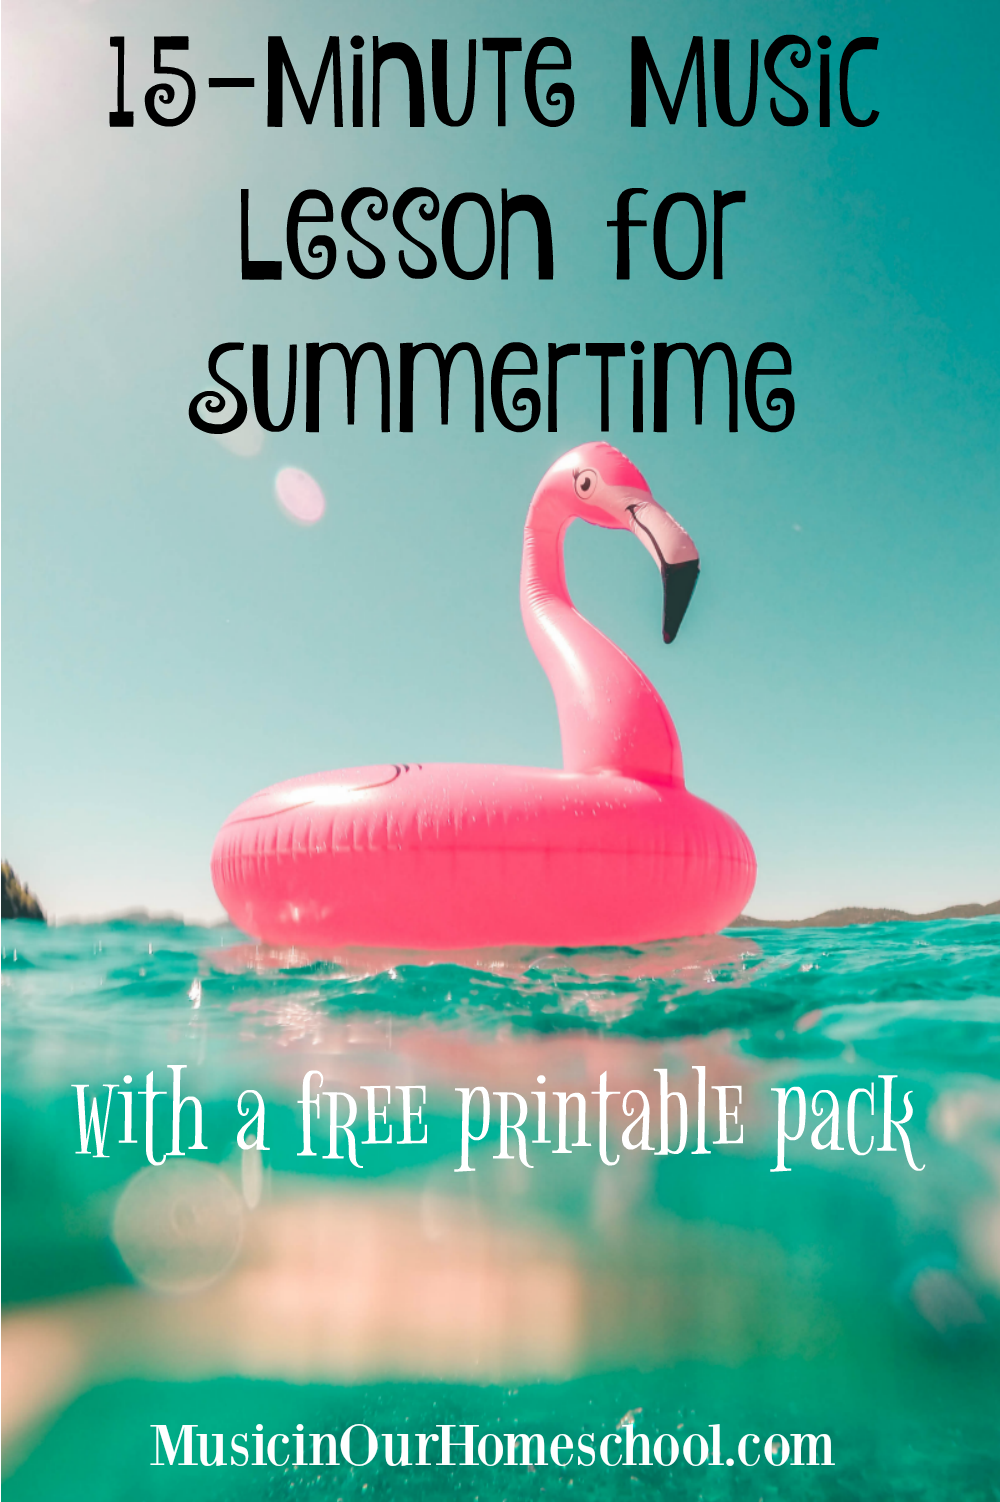 15-Minute Music Lesson for Summertime with a free 3-page printable pack! #musicinourhomeschool #musiclessonsforkids #musiced #homeschoolmusic